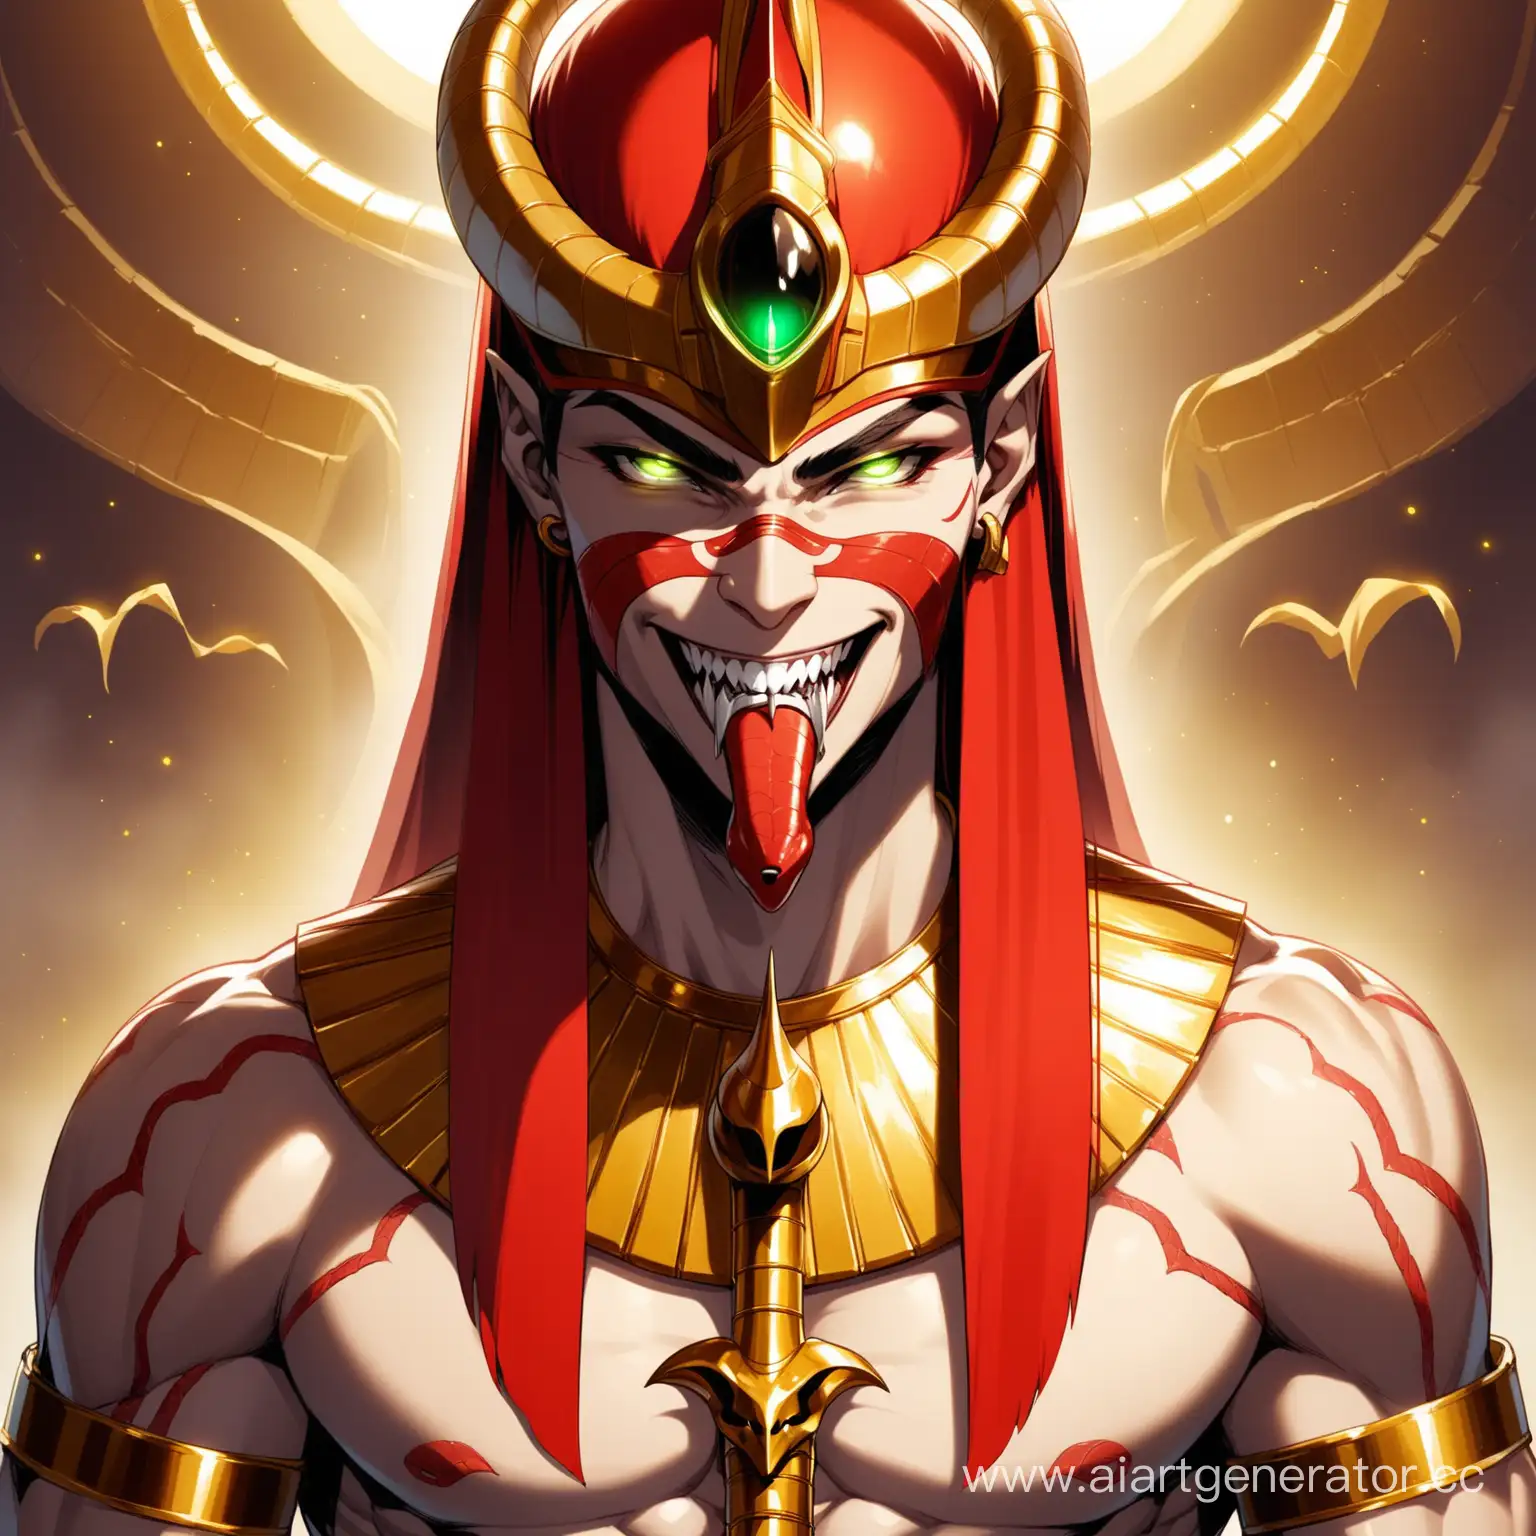 Egyptian-Deity-with-Serpent-Helm-and-Fanged-Smile